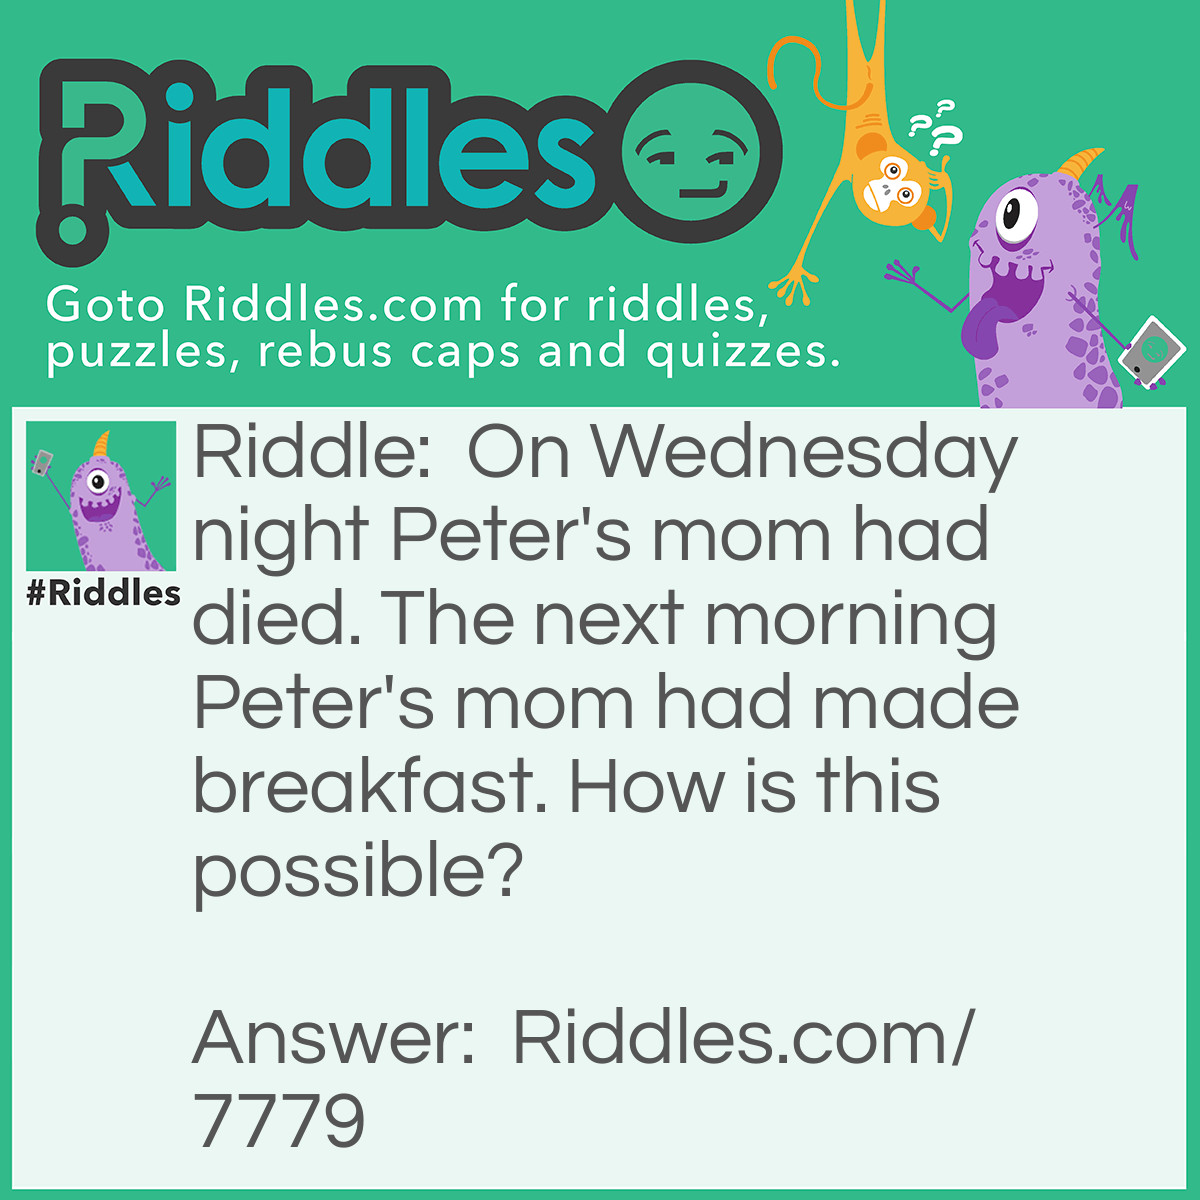 Riddle: On Wednesday night Peter's mom had died. The next morning Peter's mom had made breakfast. How is this possible? Answer: Peter has a mom, and a stepmom. His stepmom had died.